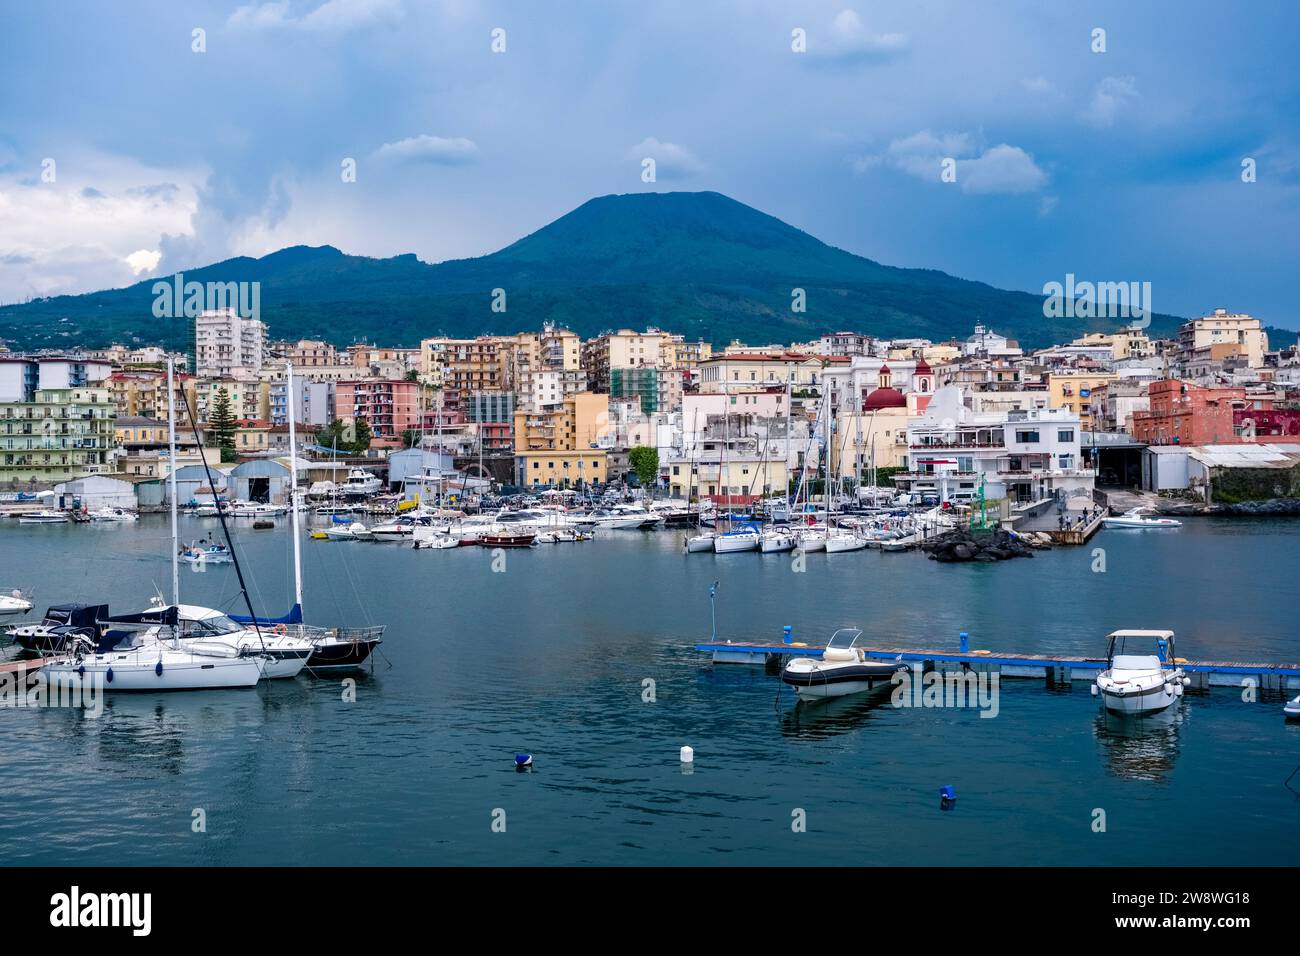 Marina and houses of the town of Torre del Greco, the volcano Vesuvius in the distance. Stock Photo